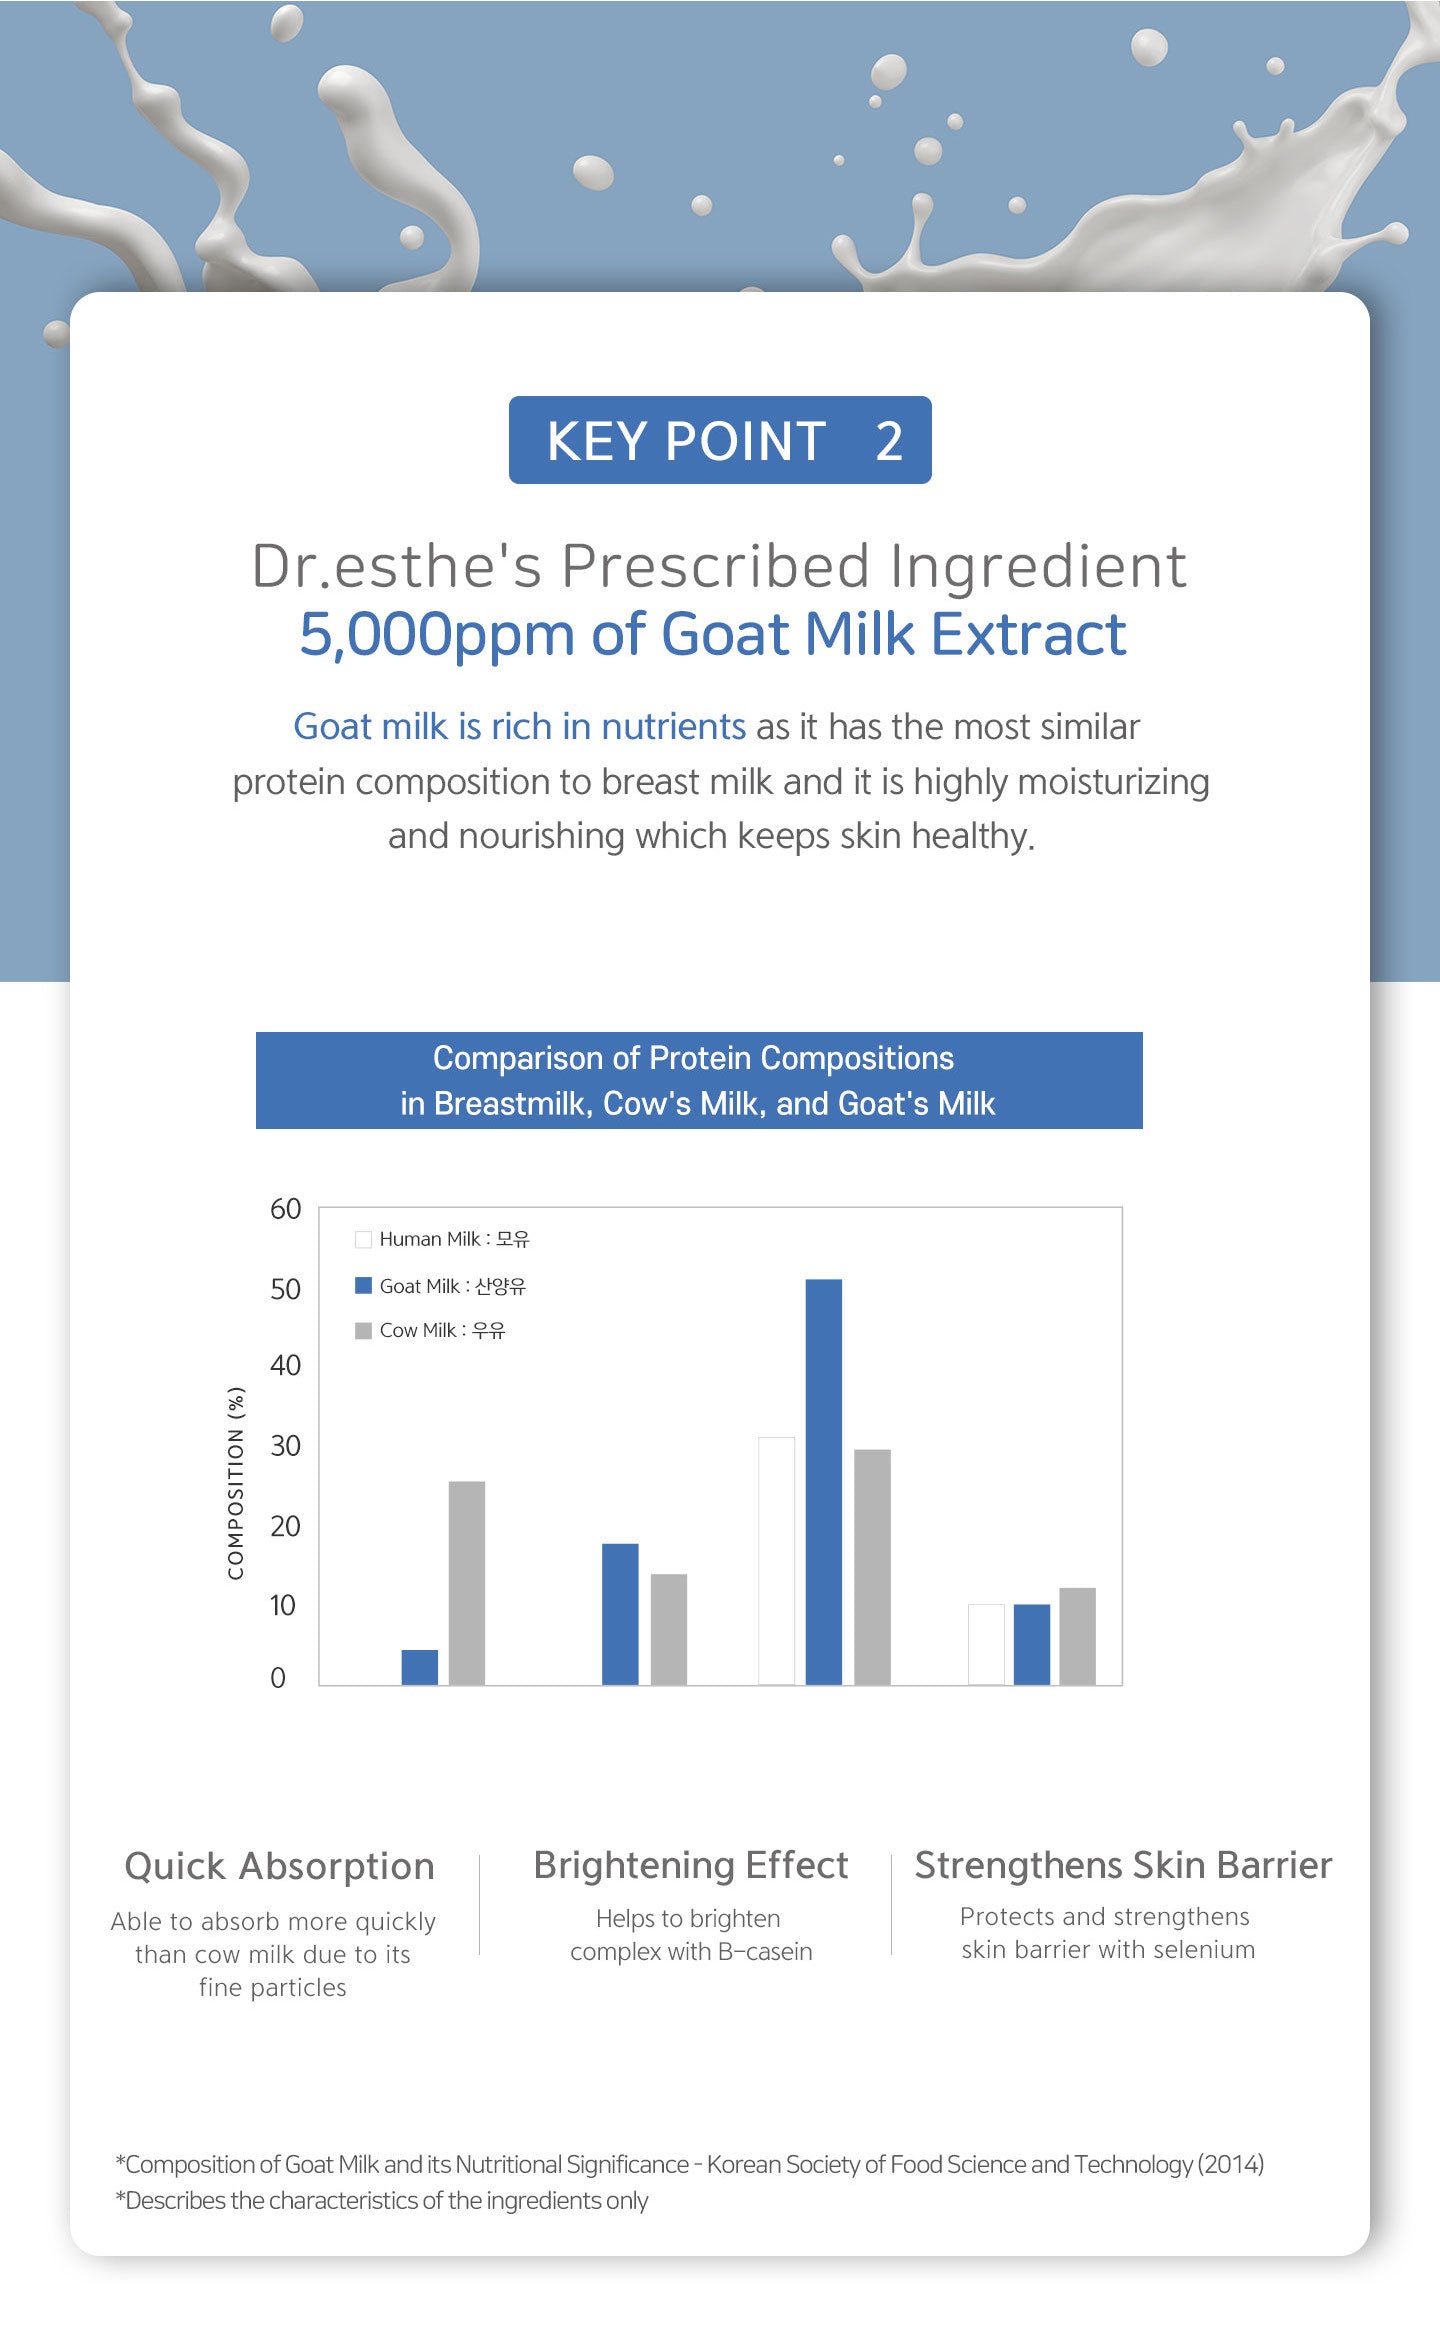 dr.esthe's prescribed ingredient 5000ppm of goat milk extract. Goat milk is rich in nutrients as it has the most similar protein composition to breast milk and it is highly moisturizing and nourishing which keeps skin healthy. 